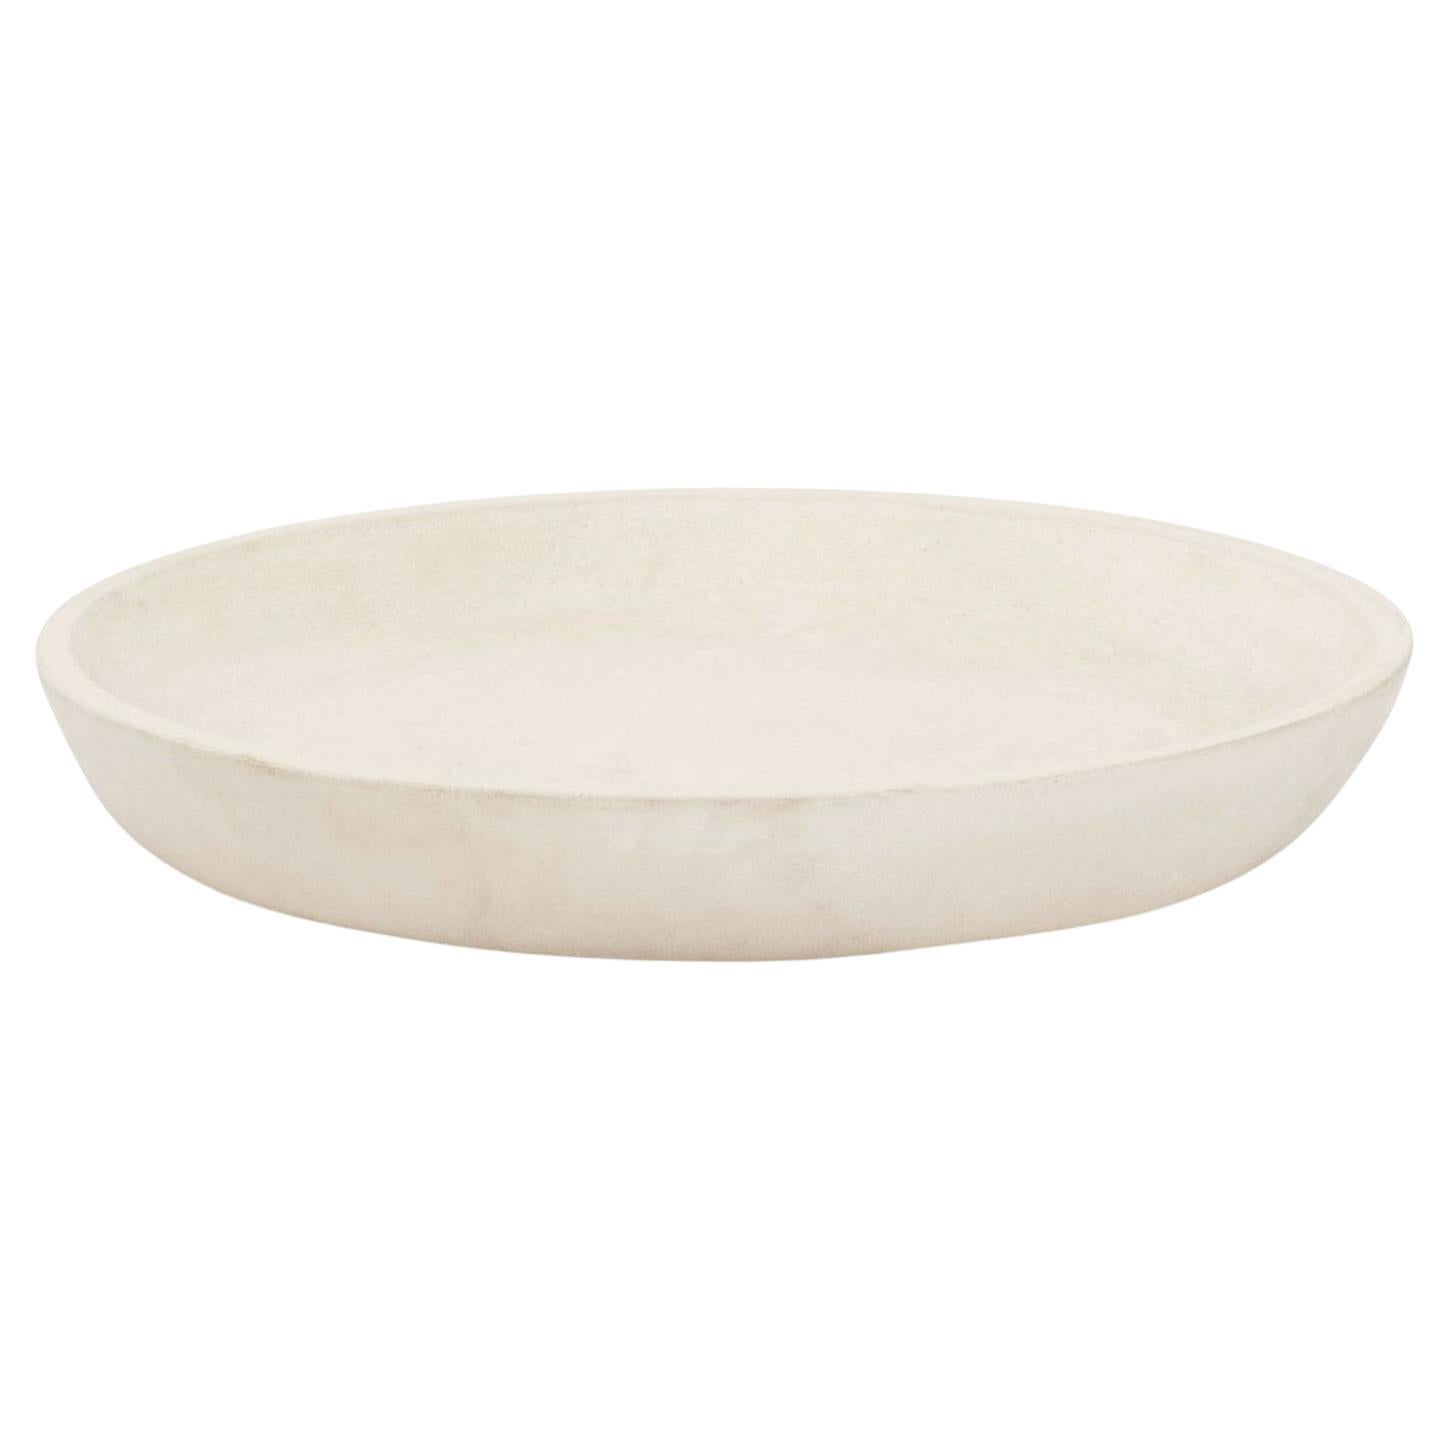 Large Round Hand-Made Stone Bowl For Sale